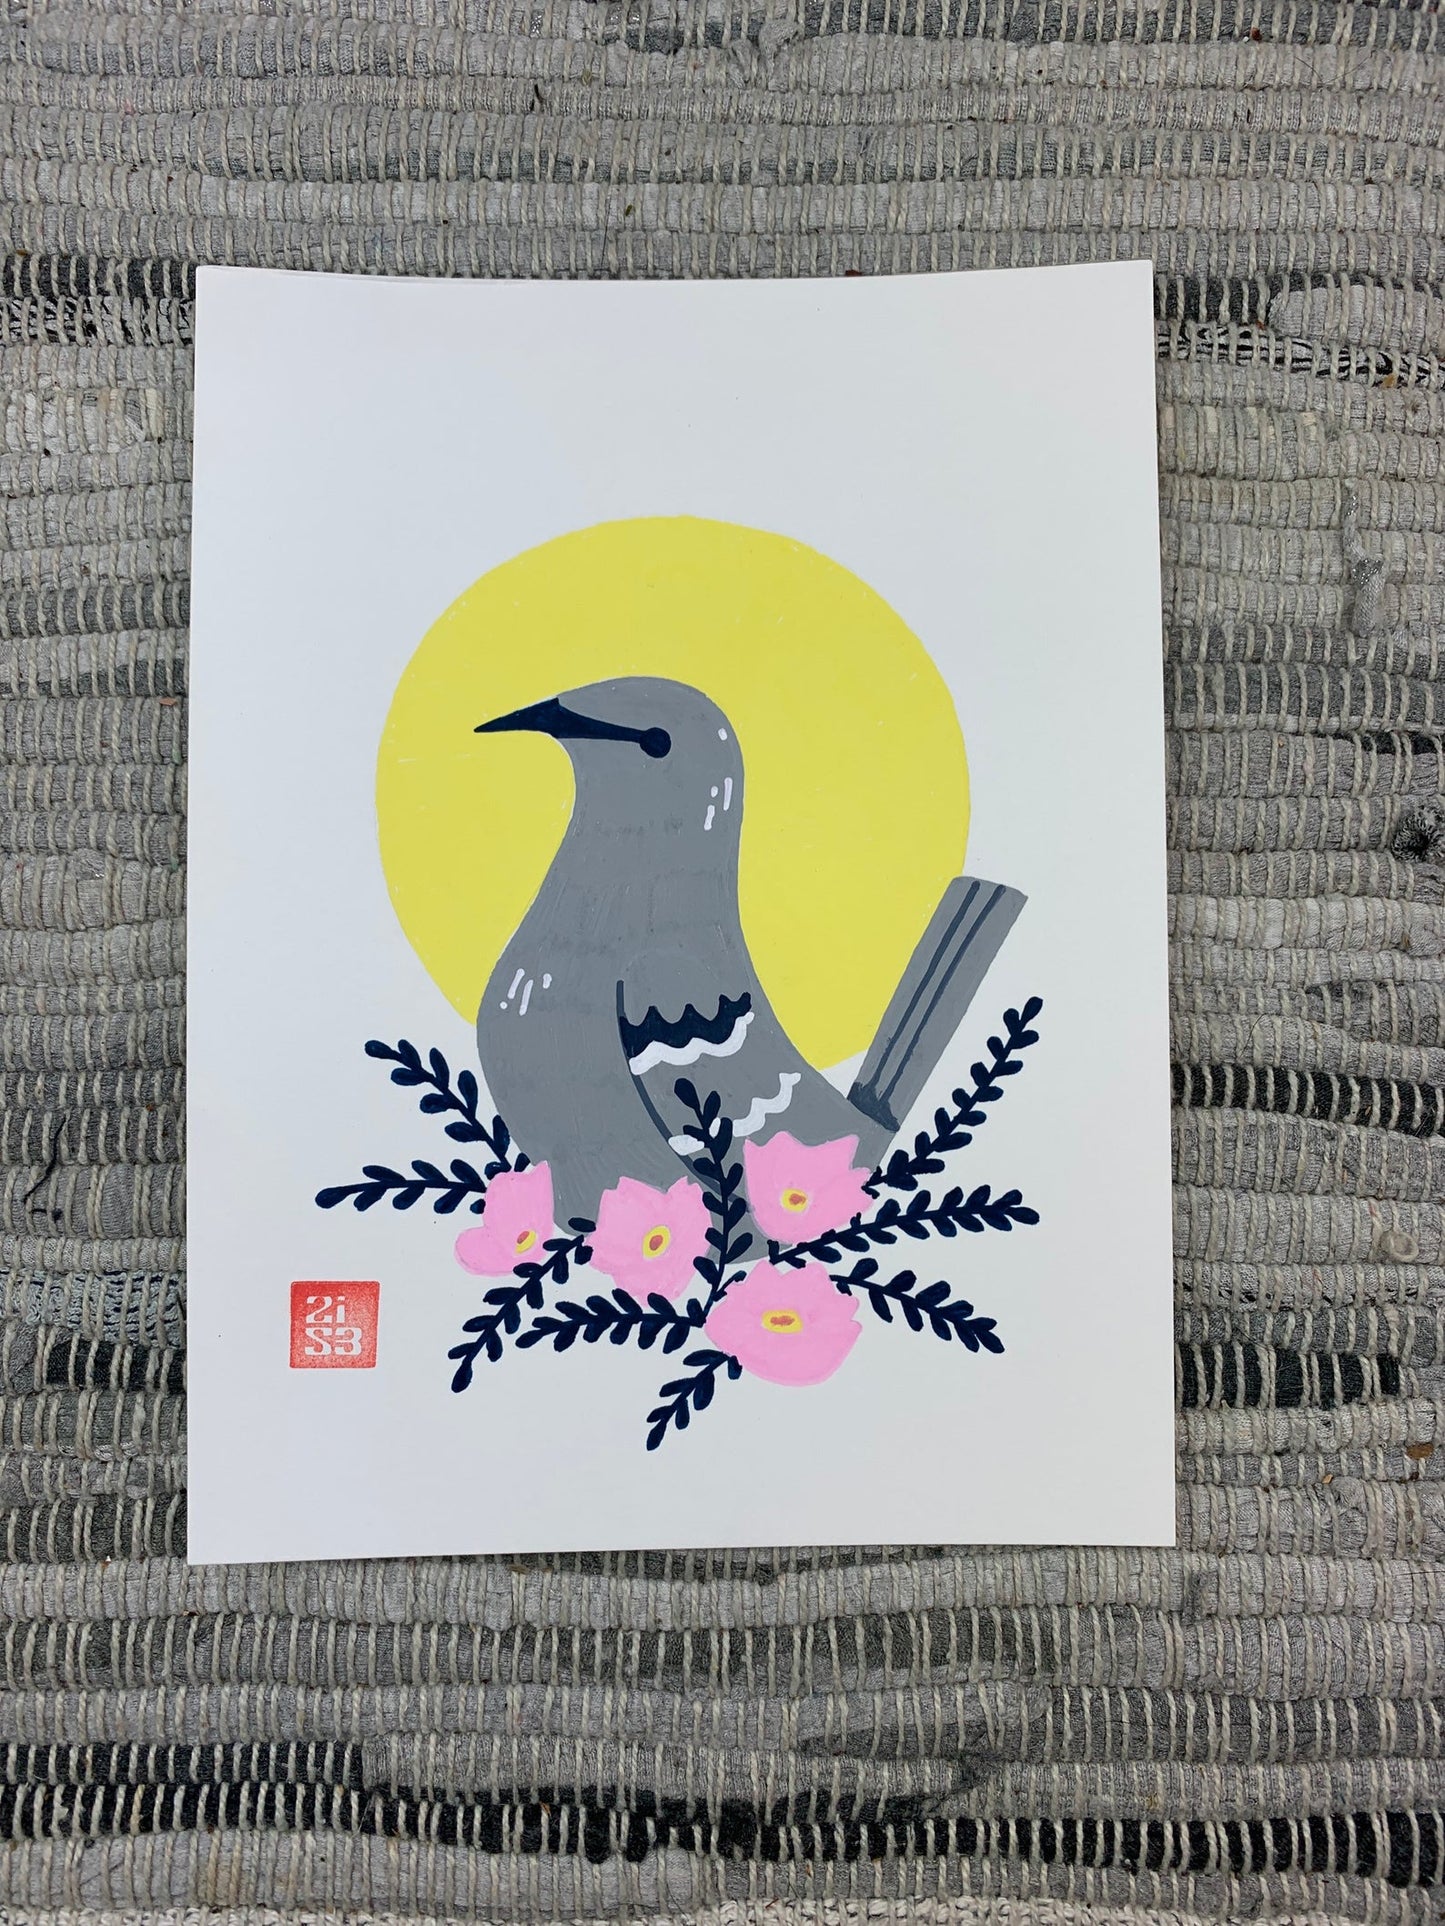 Original artwork of the Texas state bird, the northern mocking bird, in front of a geometric circle shape with a cluster of pink evening primrose (Oenothera speciosa), an abundant Texas wildflower.